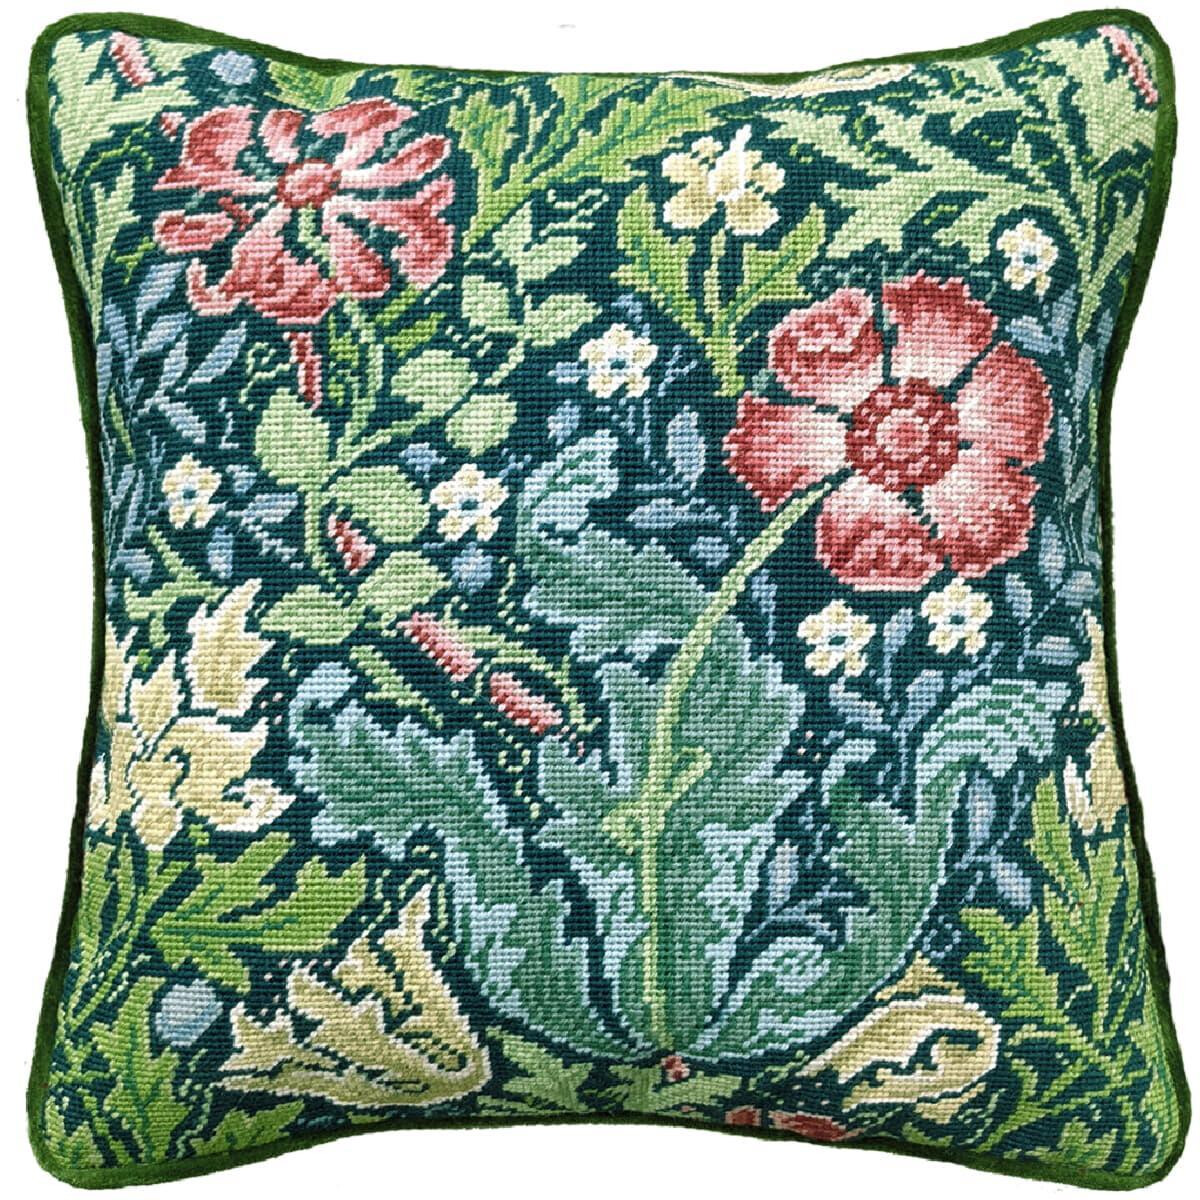 A square decorative cushion with embroidery pack...